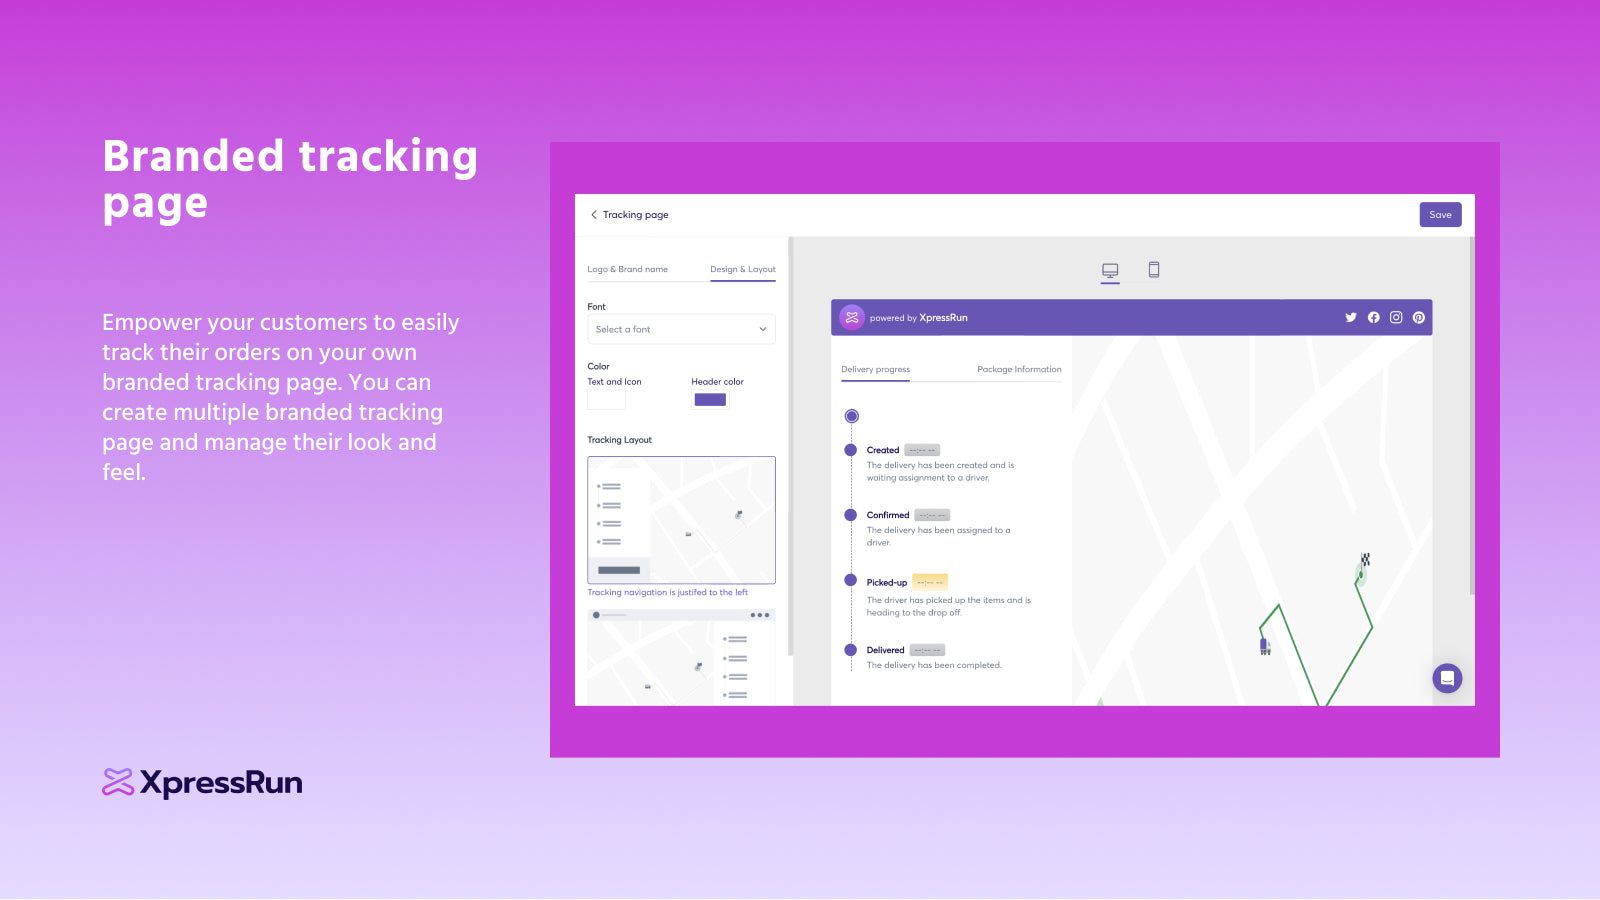 Branded tracking page